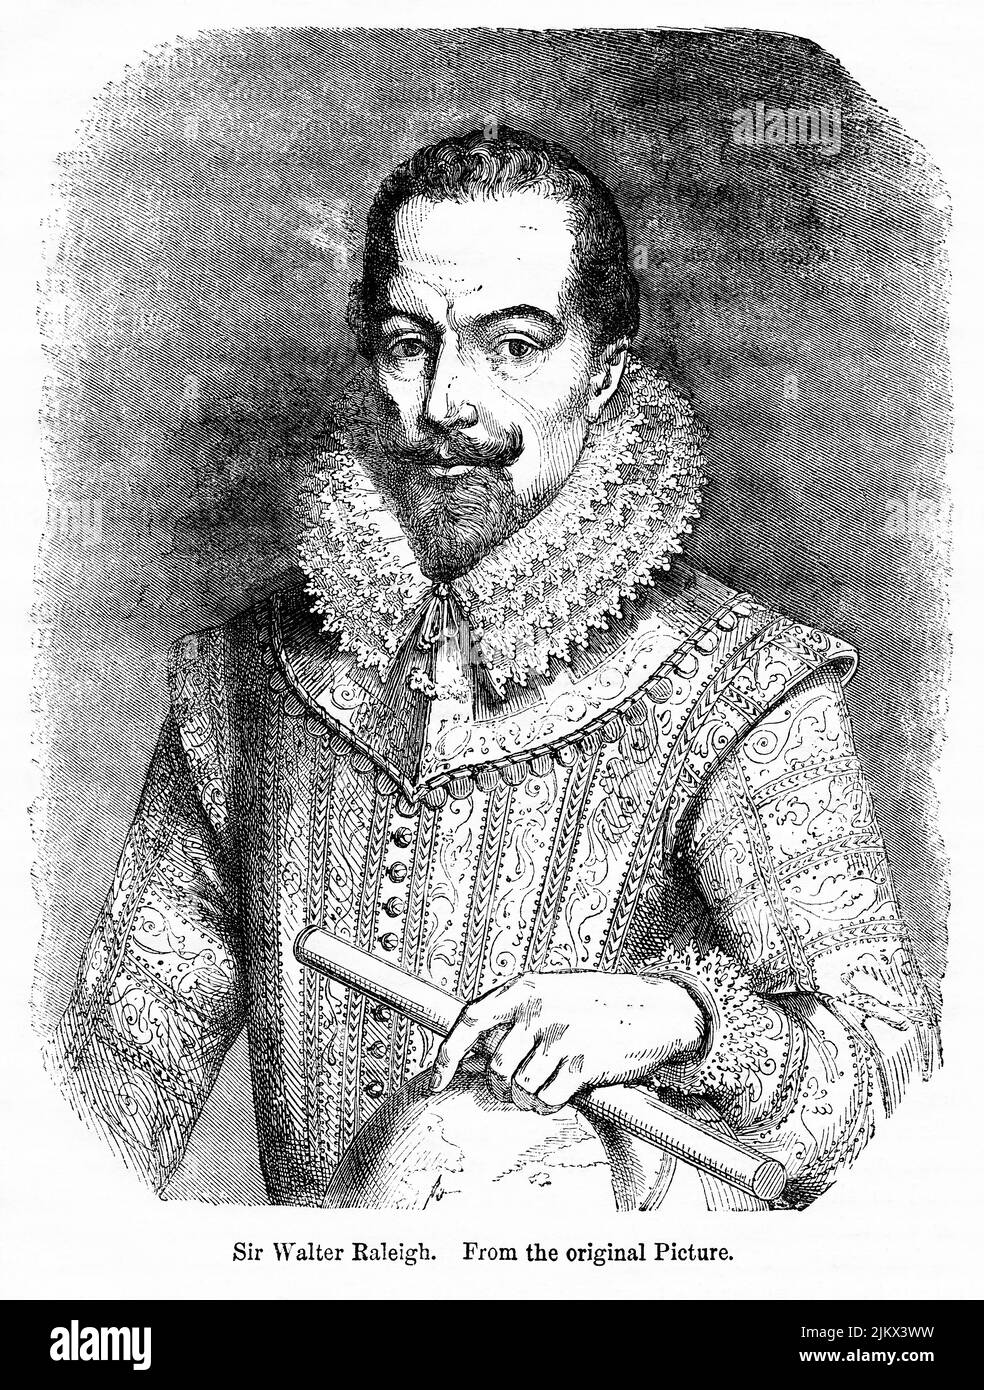 Sir Walter Raleigh, Illustration from the Book, 'John Cassel’s Illustrated History of England, Volume II', text by William Howitt, Cassell, Petter, and Galpin, London, 1858 Stock Photo